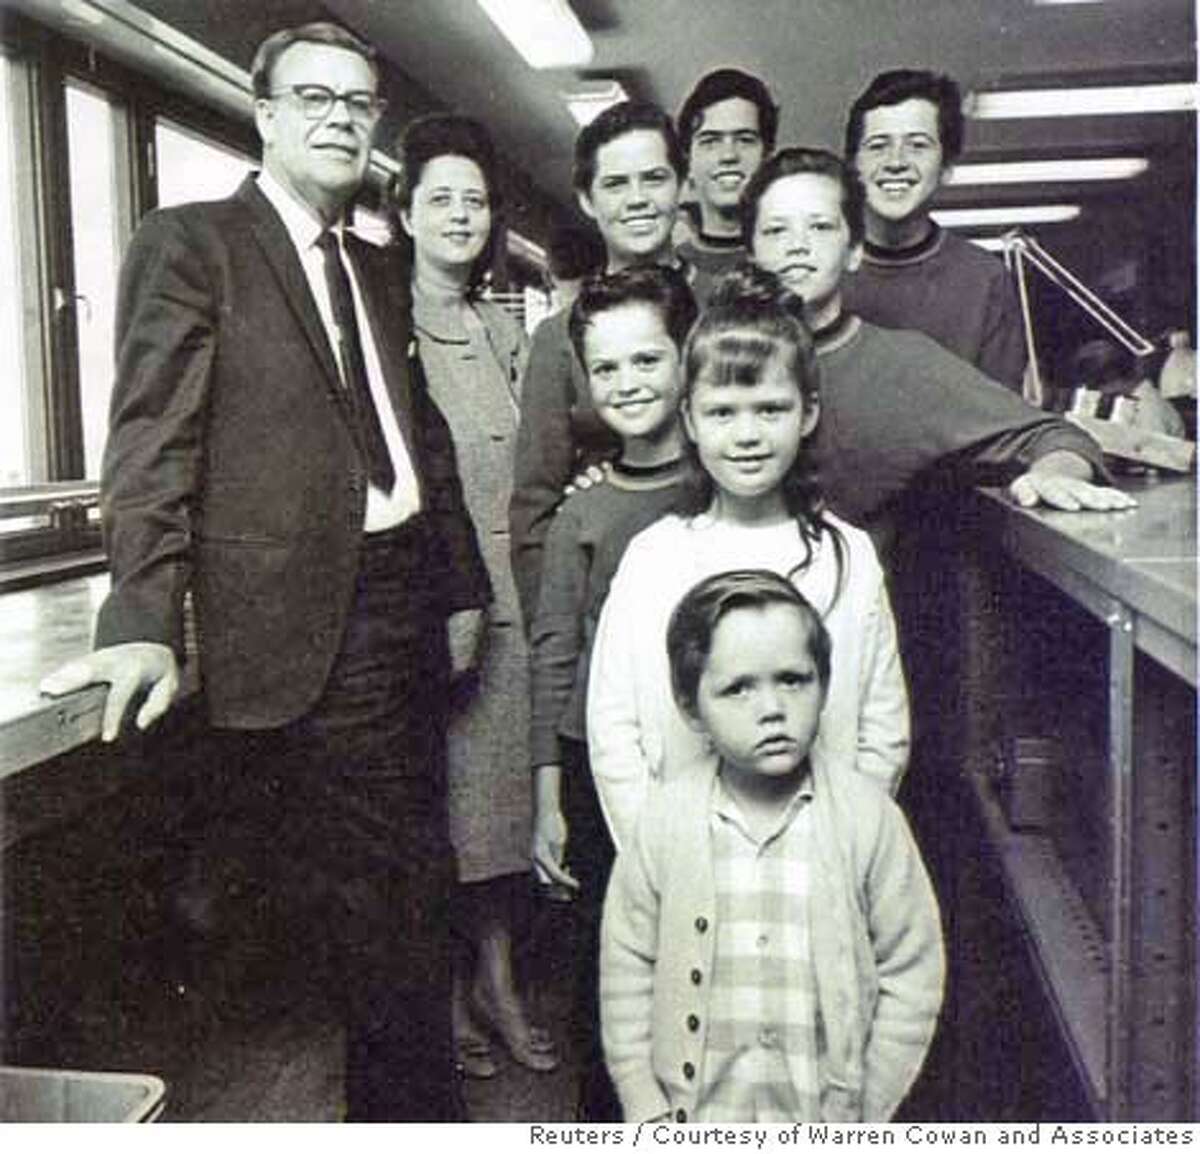 George (L) and Olive Osmond are pictured with the Osmond children in this undated photograph. The other members of the Osmond family are (from top L-R): Alan, Wayne, Merrill and Jay Osmond, and (C, front to back) Jimmy, Marie and Donny.